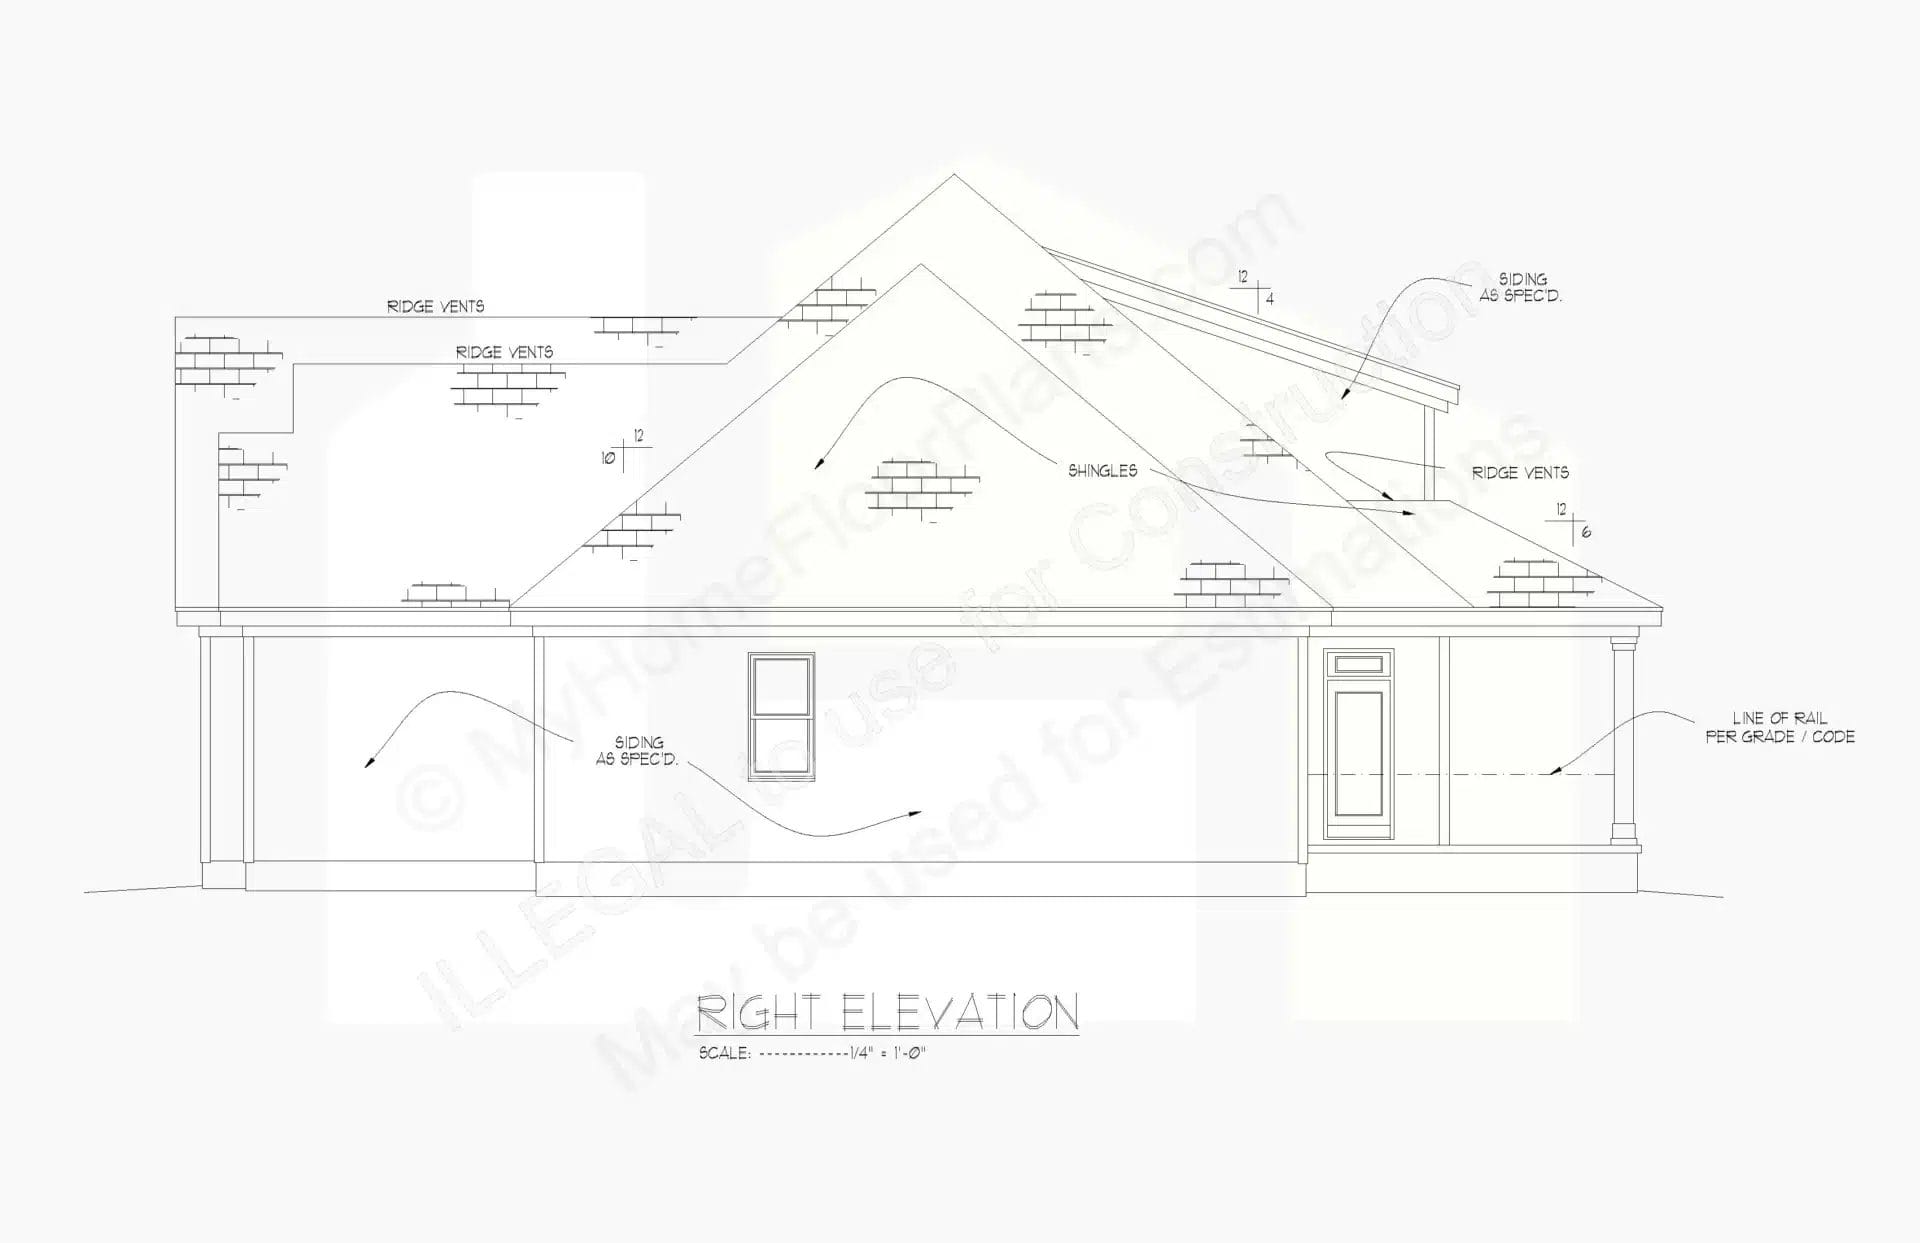 Architectural design of a home's right elevation, showing detailed roof structure, windows, and door placements. Annotations indicate dimensions and materials such as ridge vents and shingle siding using the 13-1721 product.